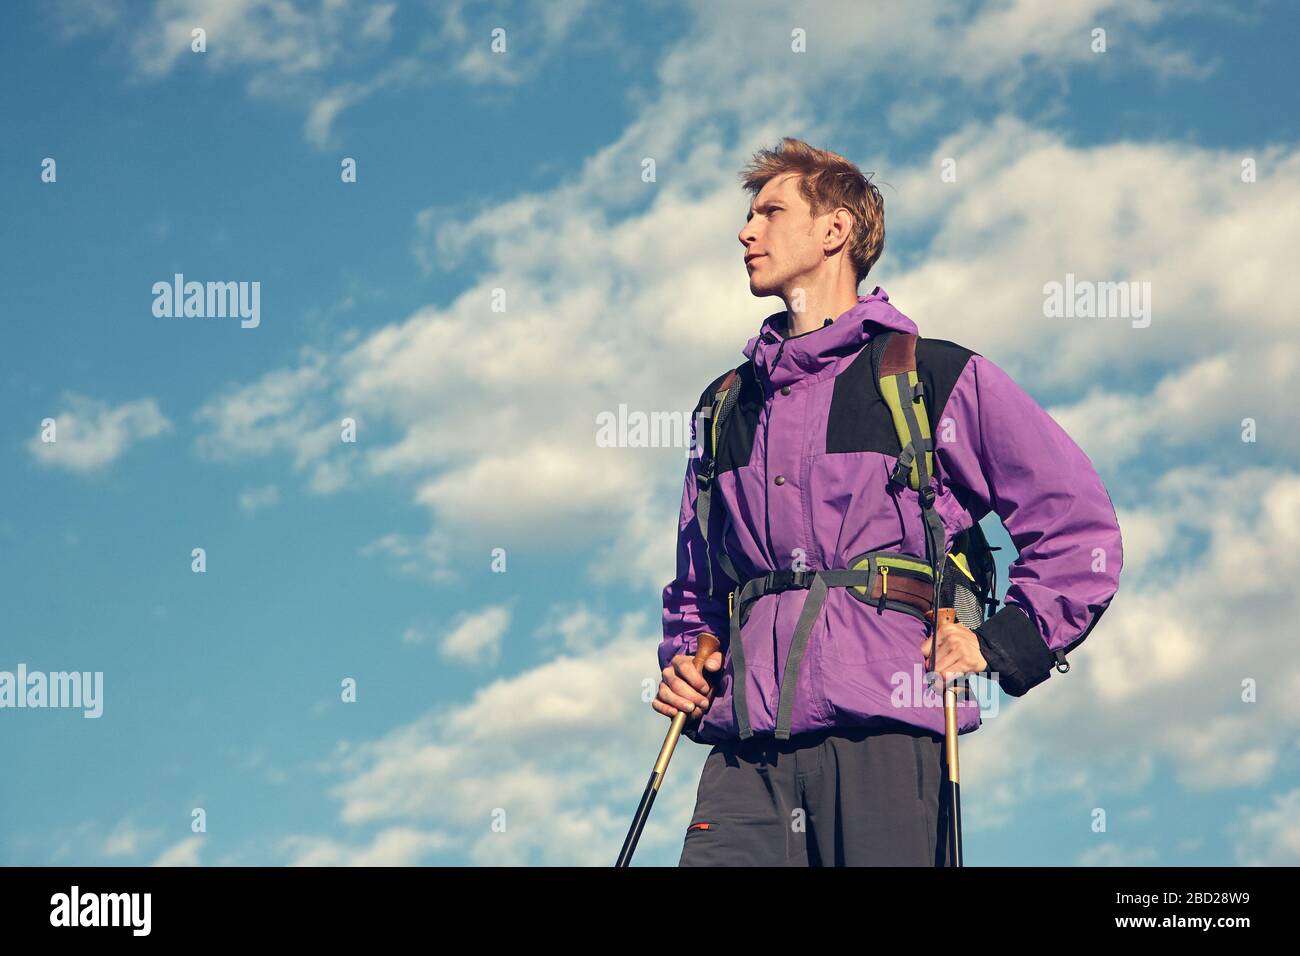 climber on trail in the mountains. a man with a backpack in a hike. Stock Photo